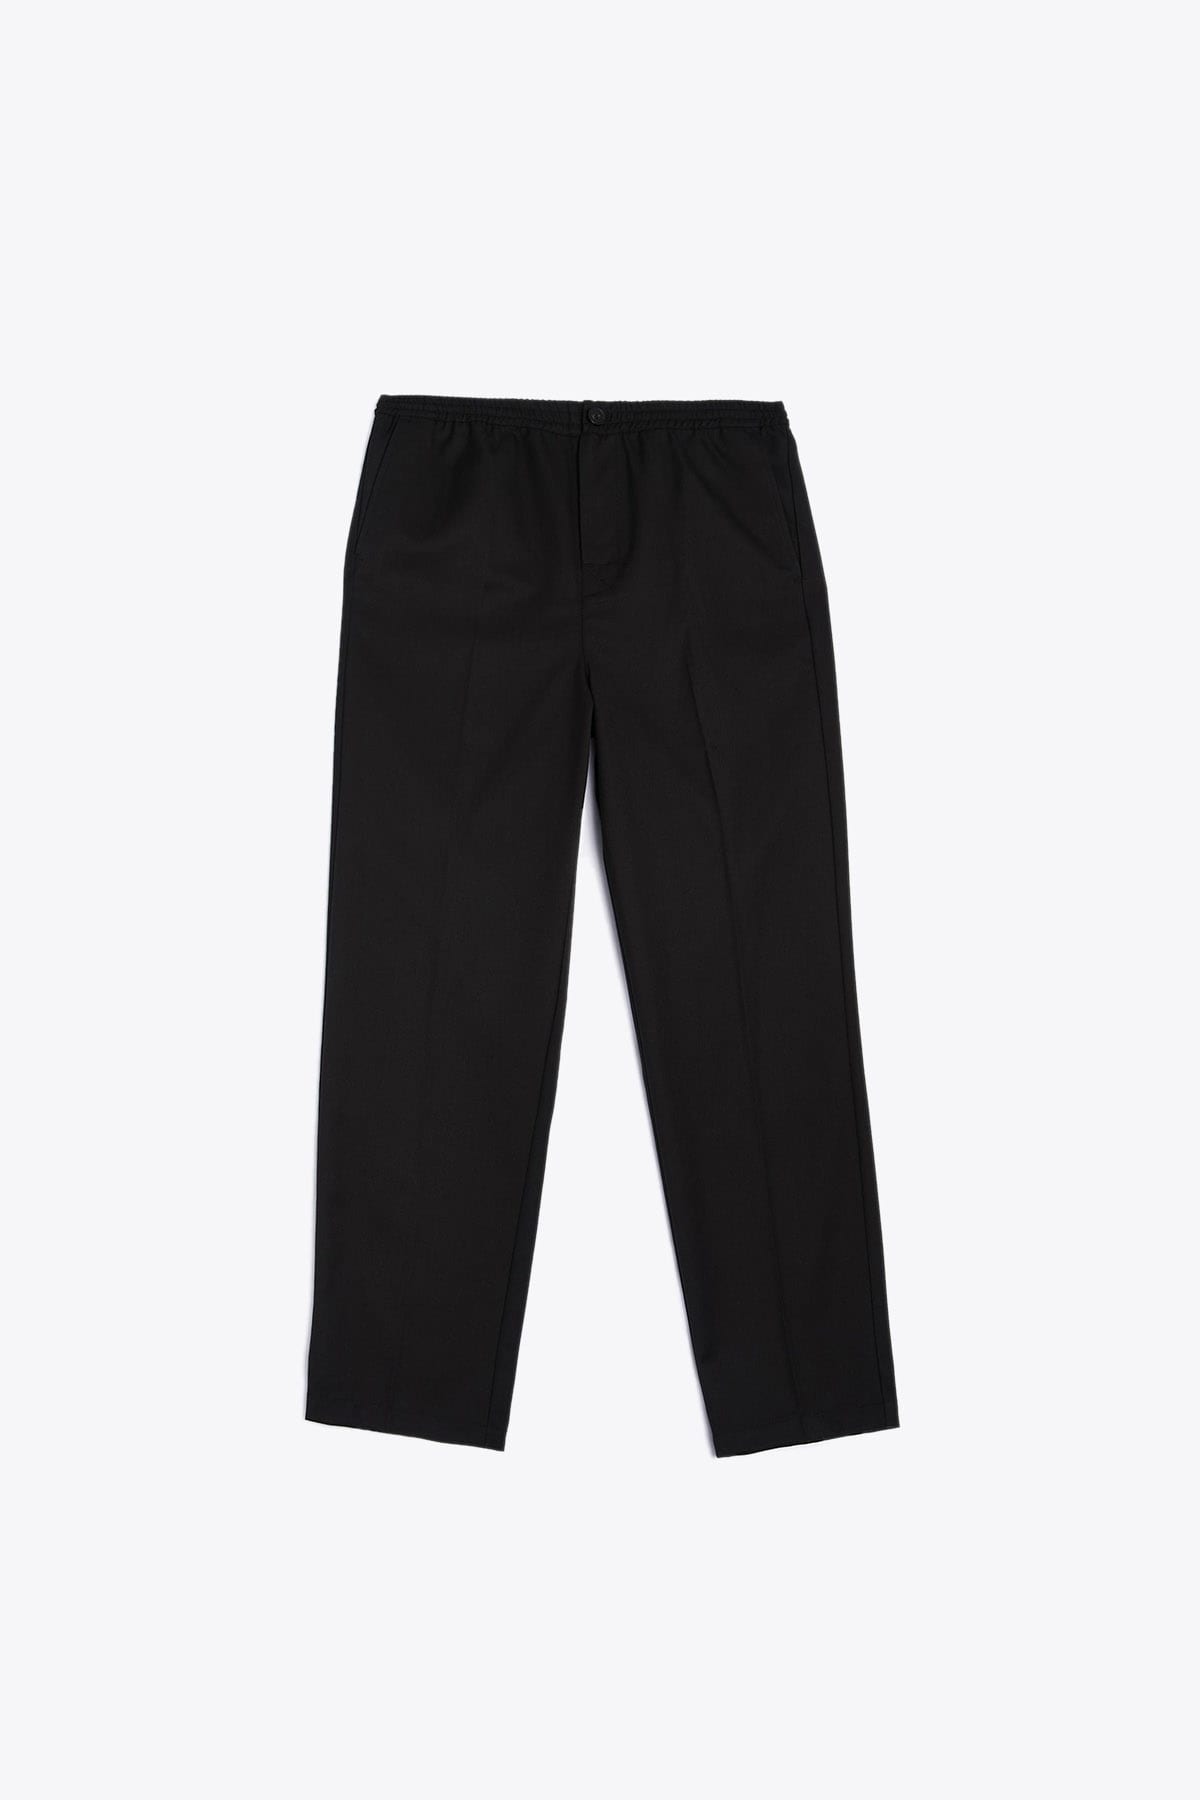 Stussy Bryan Pant Black Relaxed Trouser With Elastic Waistband - Bryan Pant